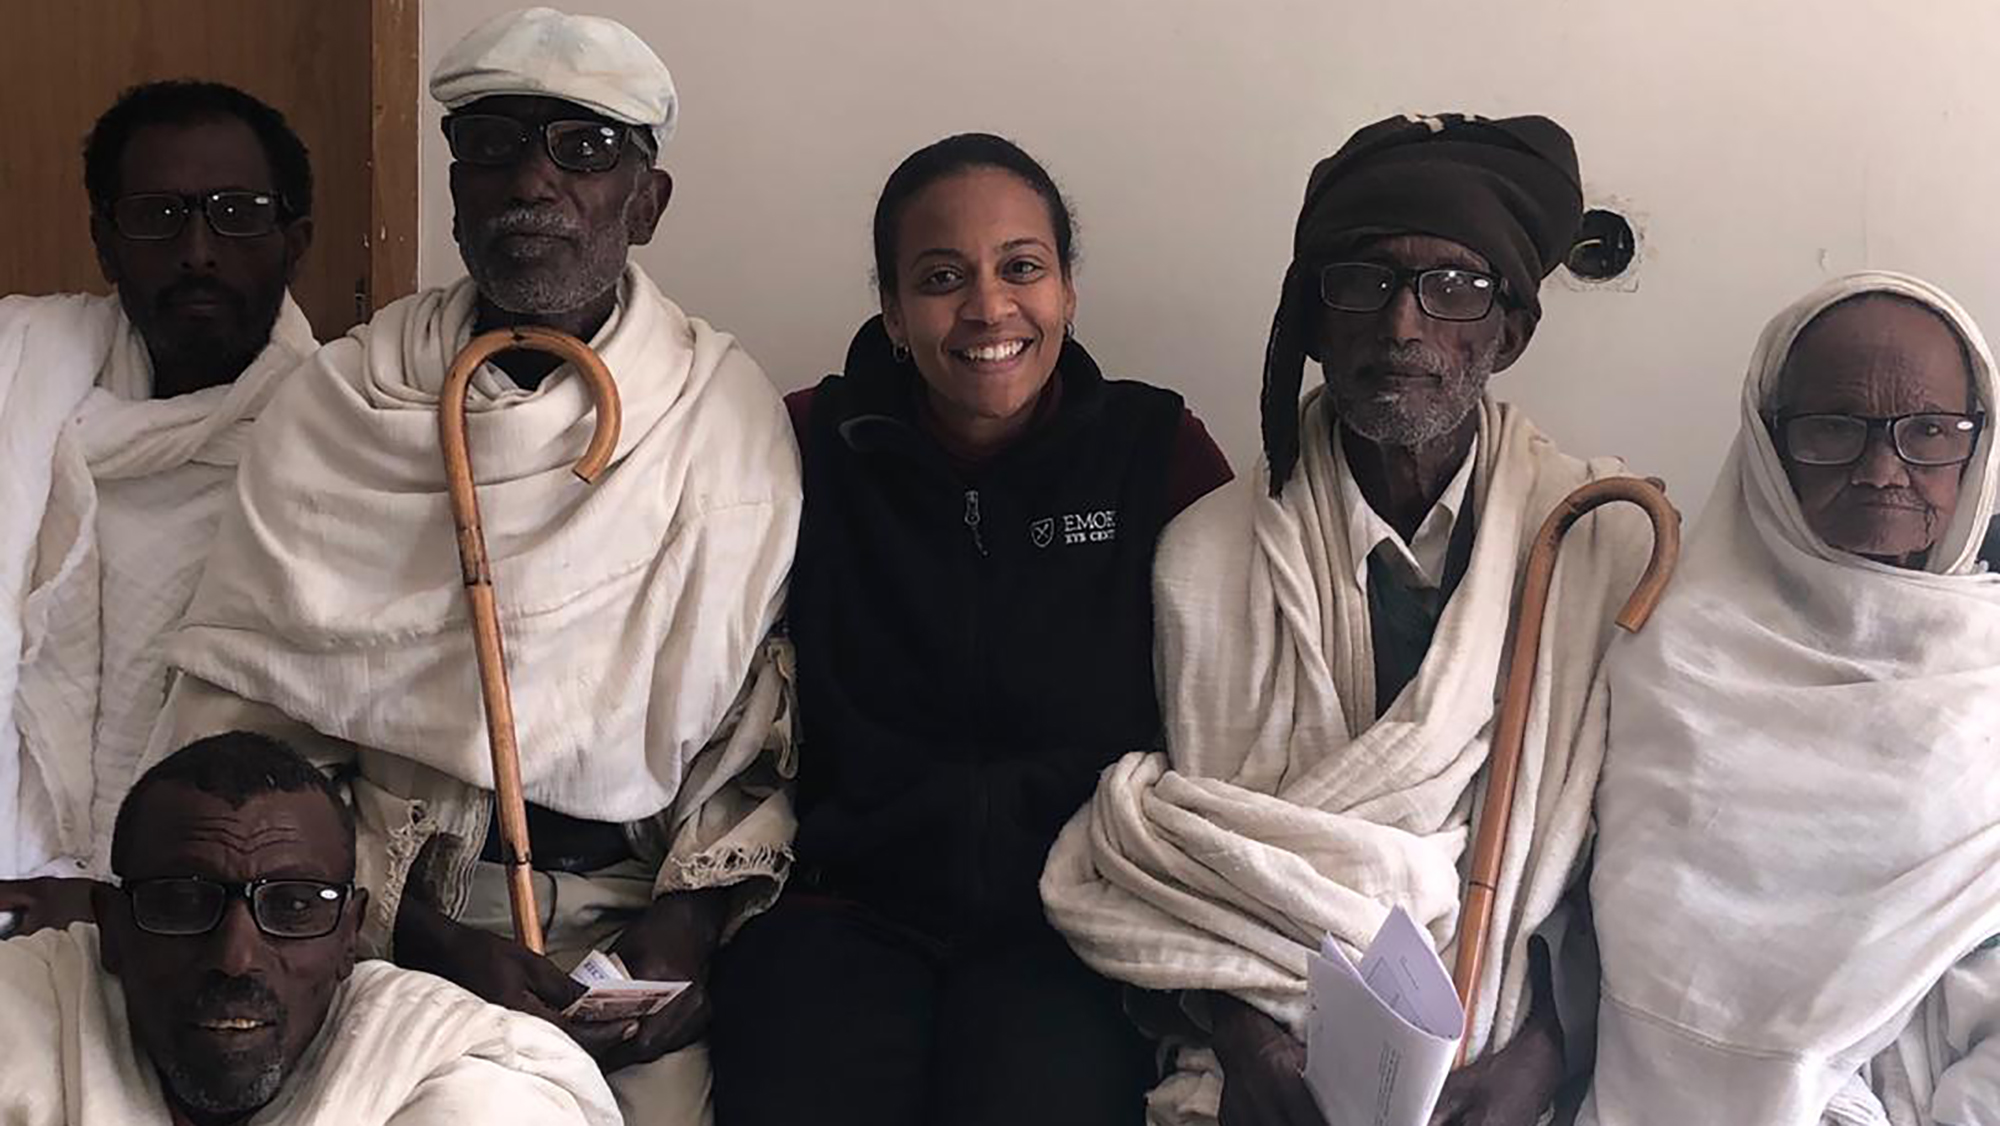 four people - 3 men, 1 woman - staff and patients of a GO-E clinic in Ethiopia